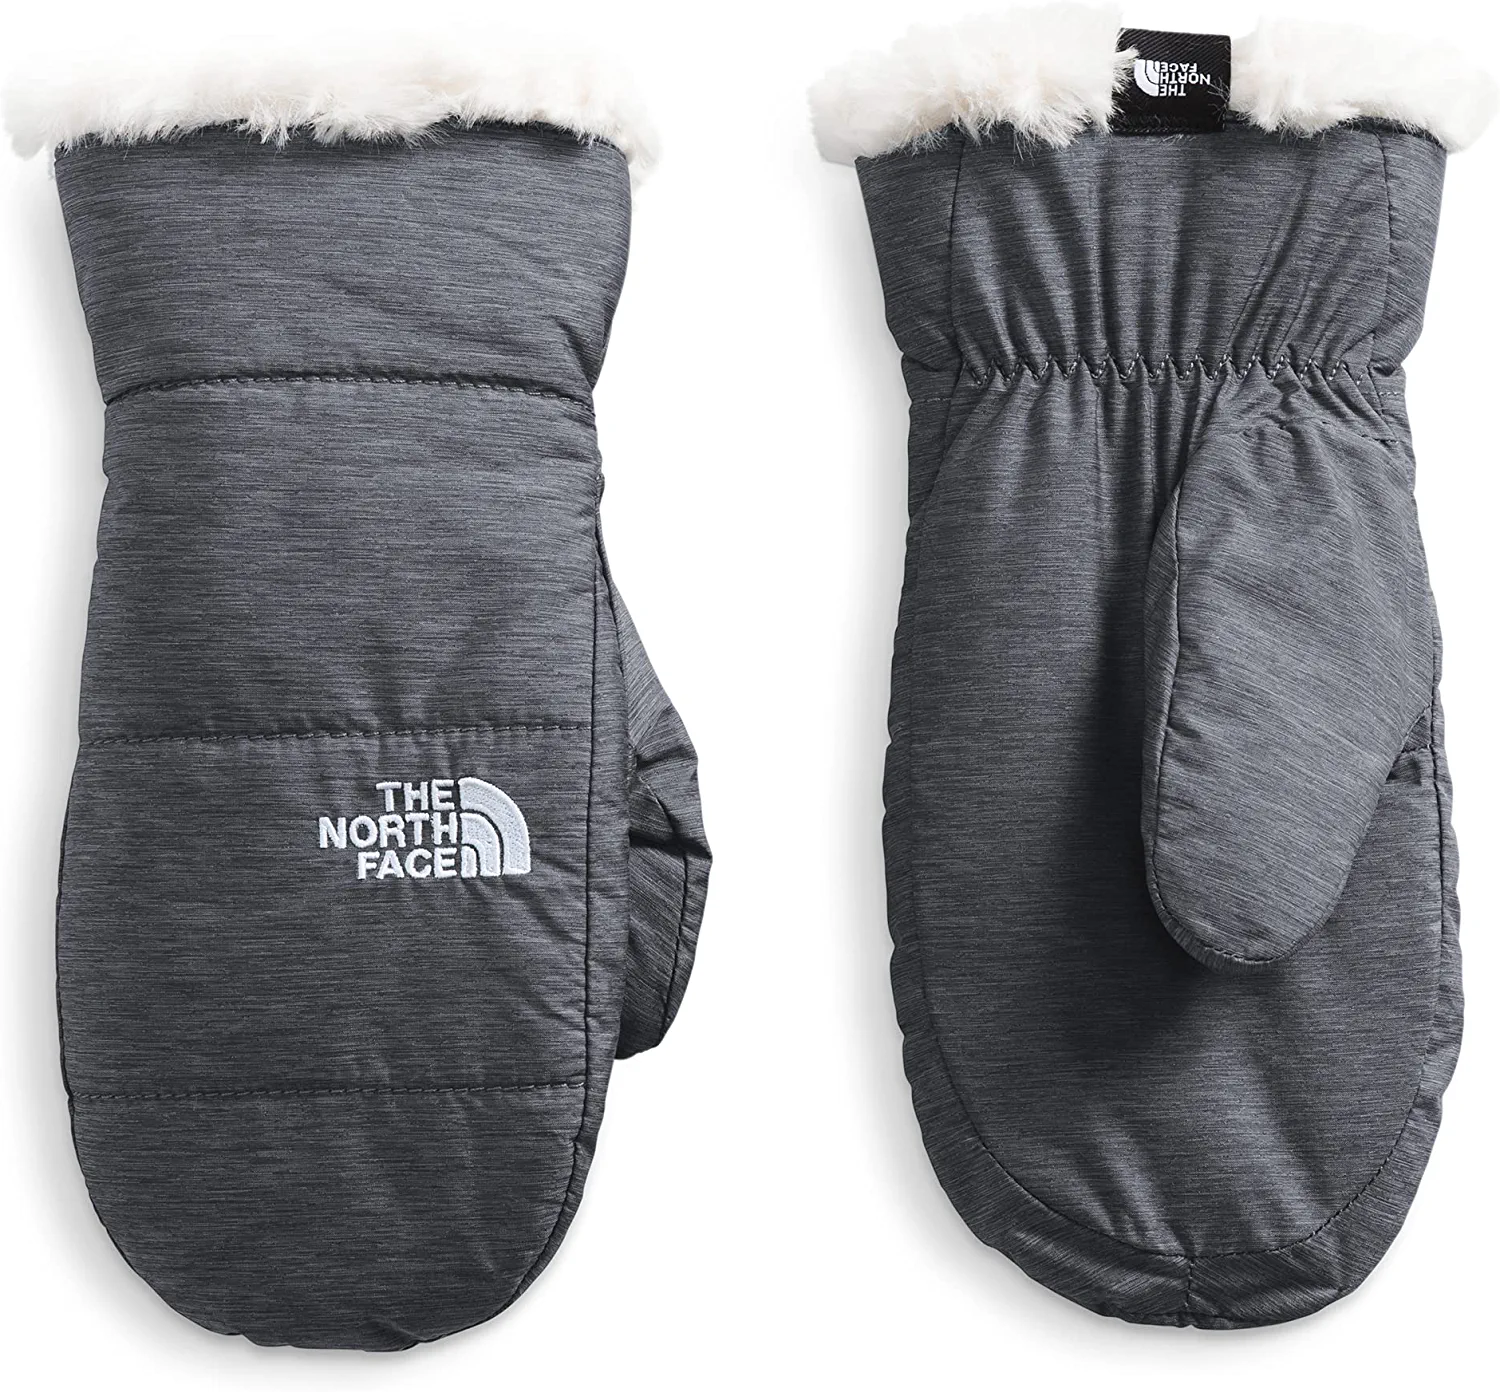 The North Face Girls' Mossbud Swirl Mitts